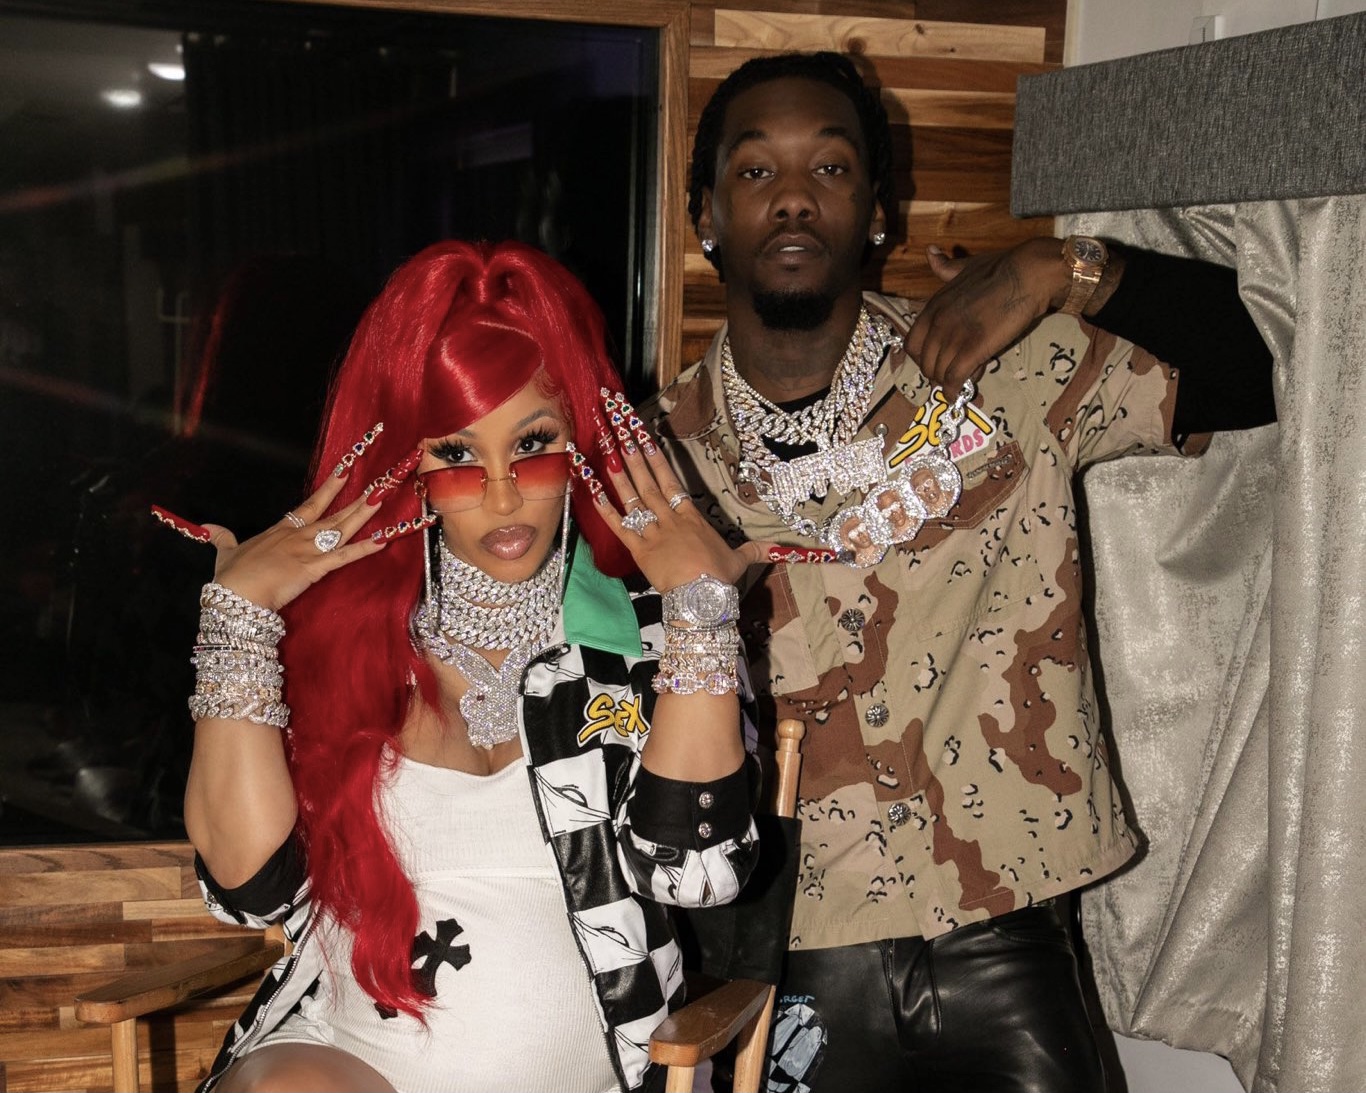 Cardi B Performs at Hot 97's Summer Jam with Migos Wearing Chrome